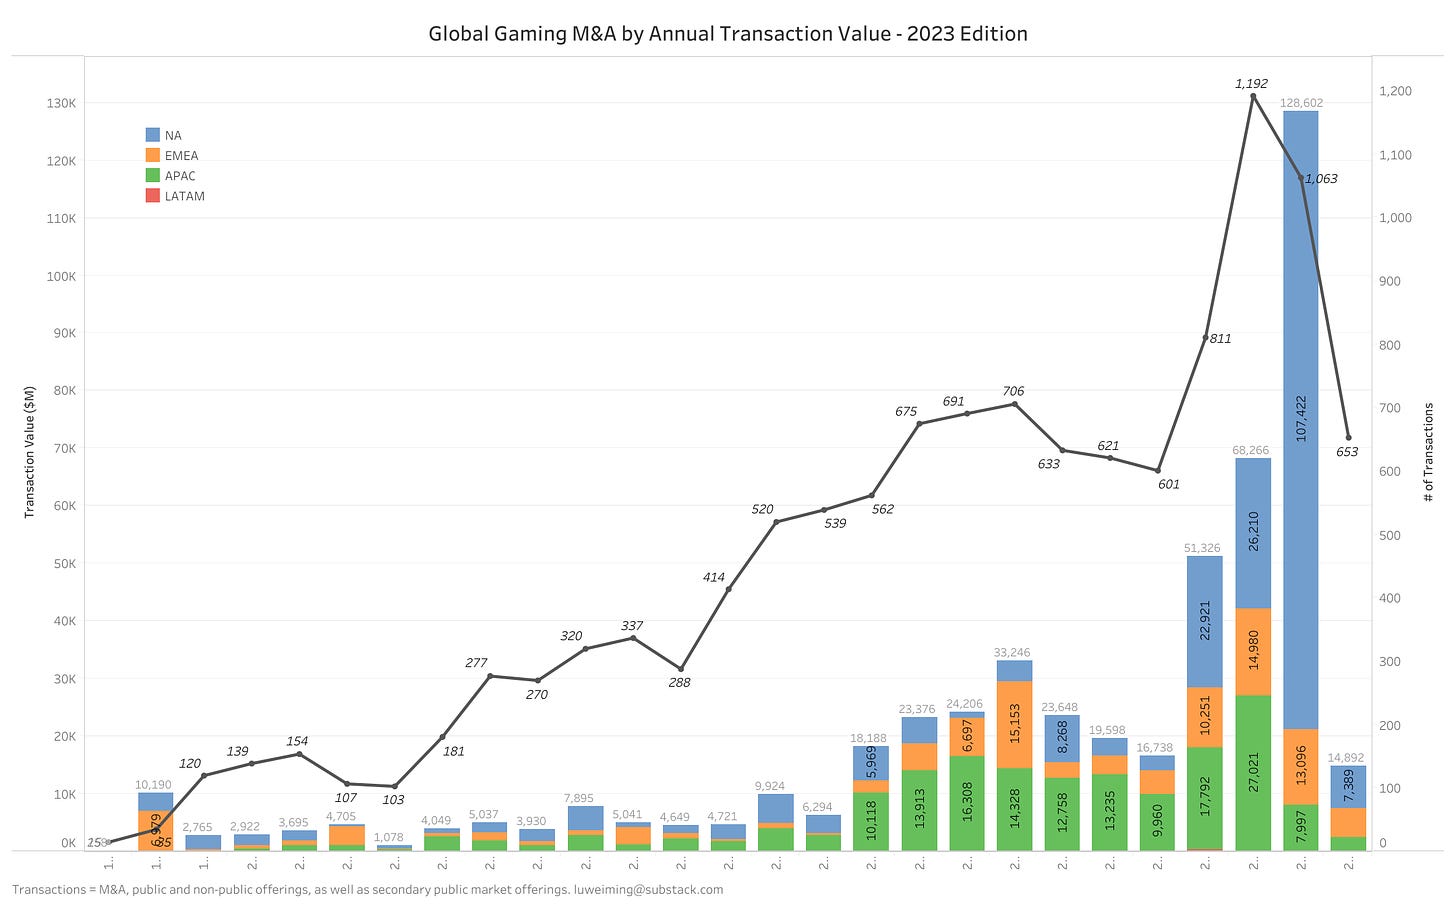 Global Gaming M&A by Annual Transaction Value - 2023 Edition